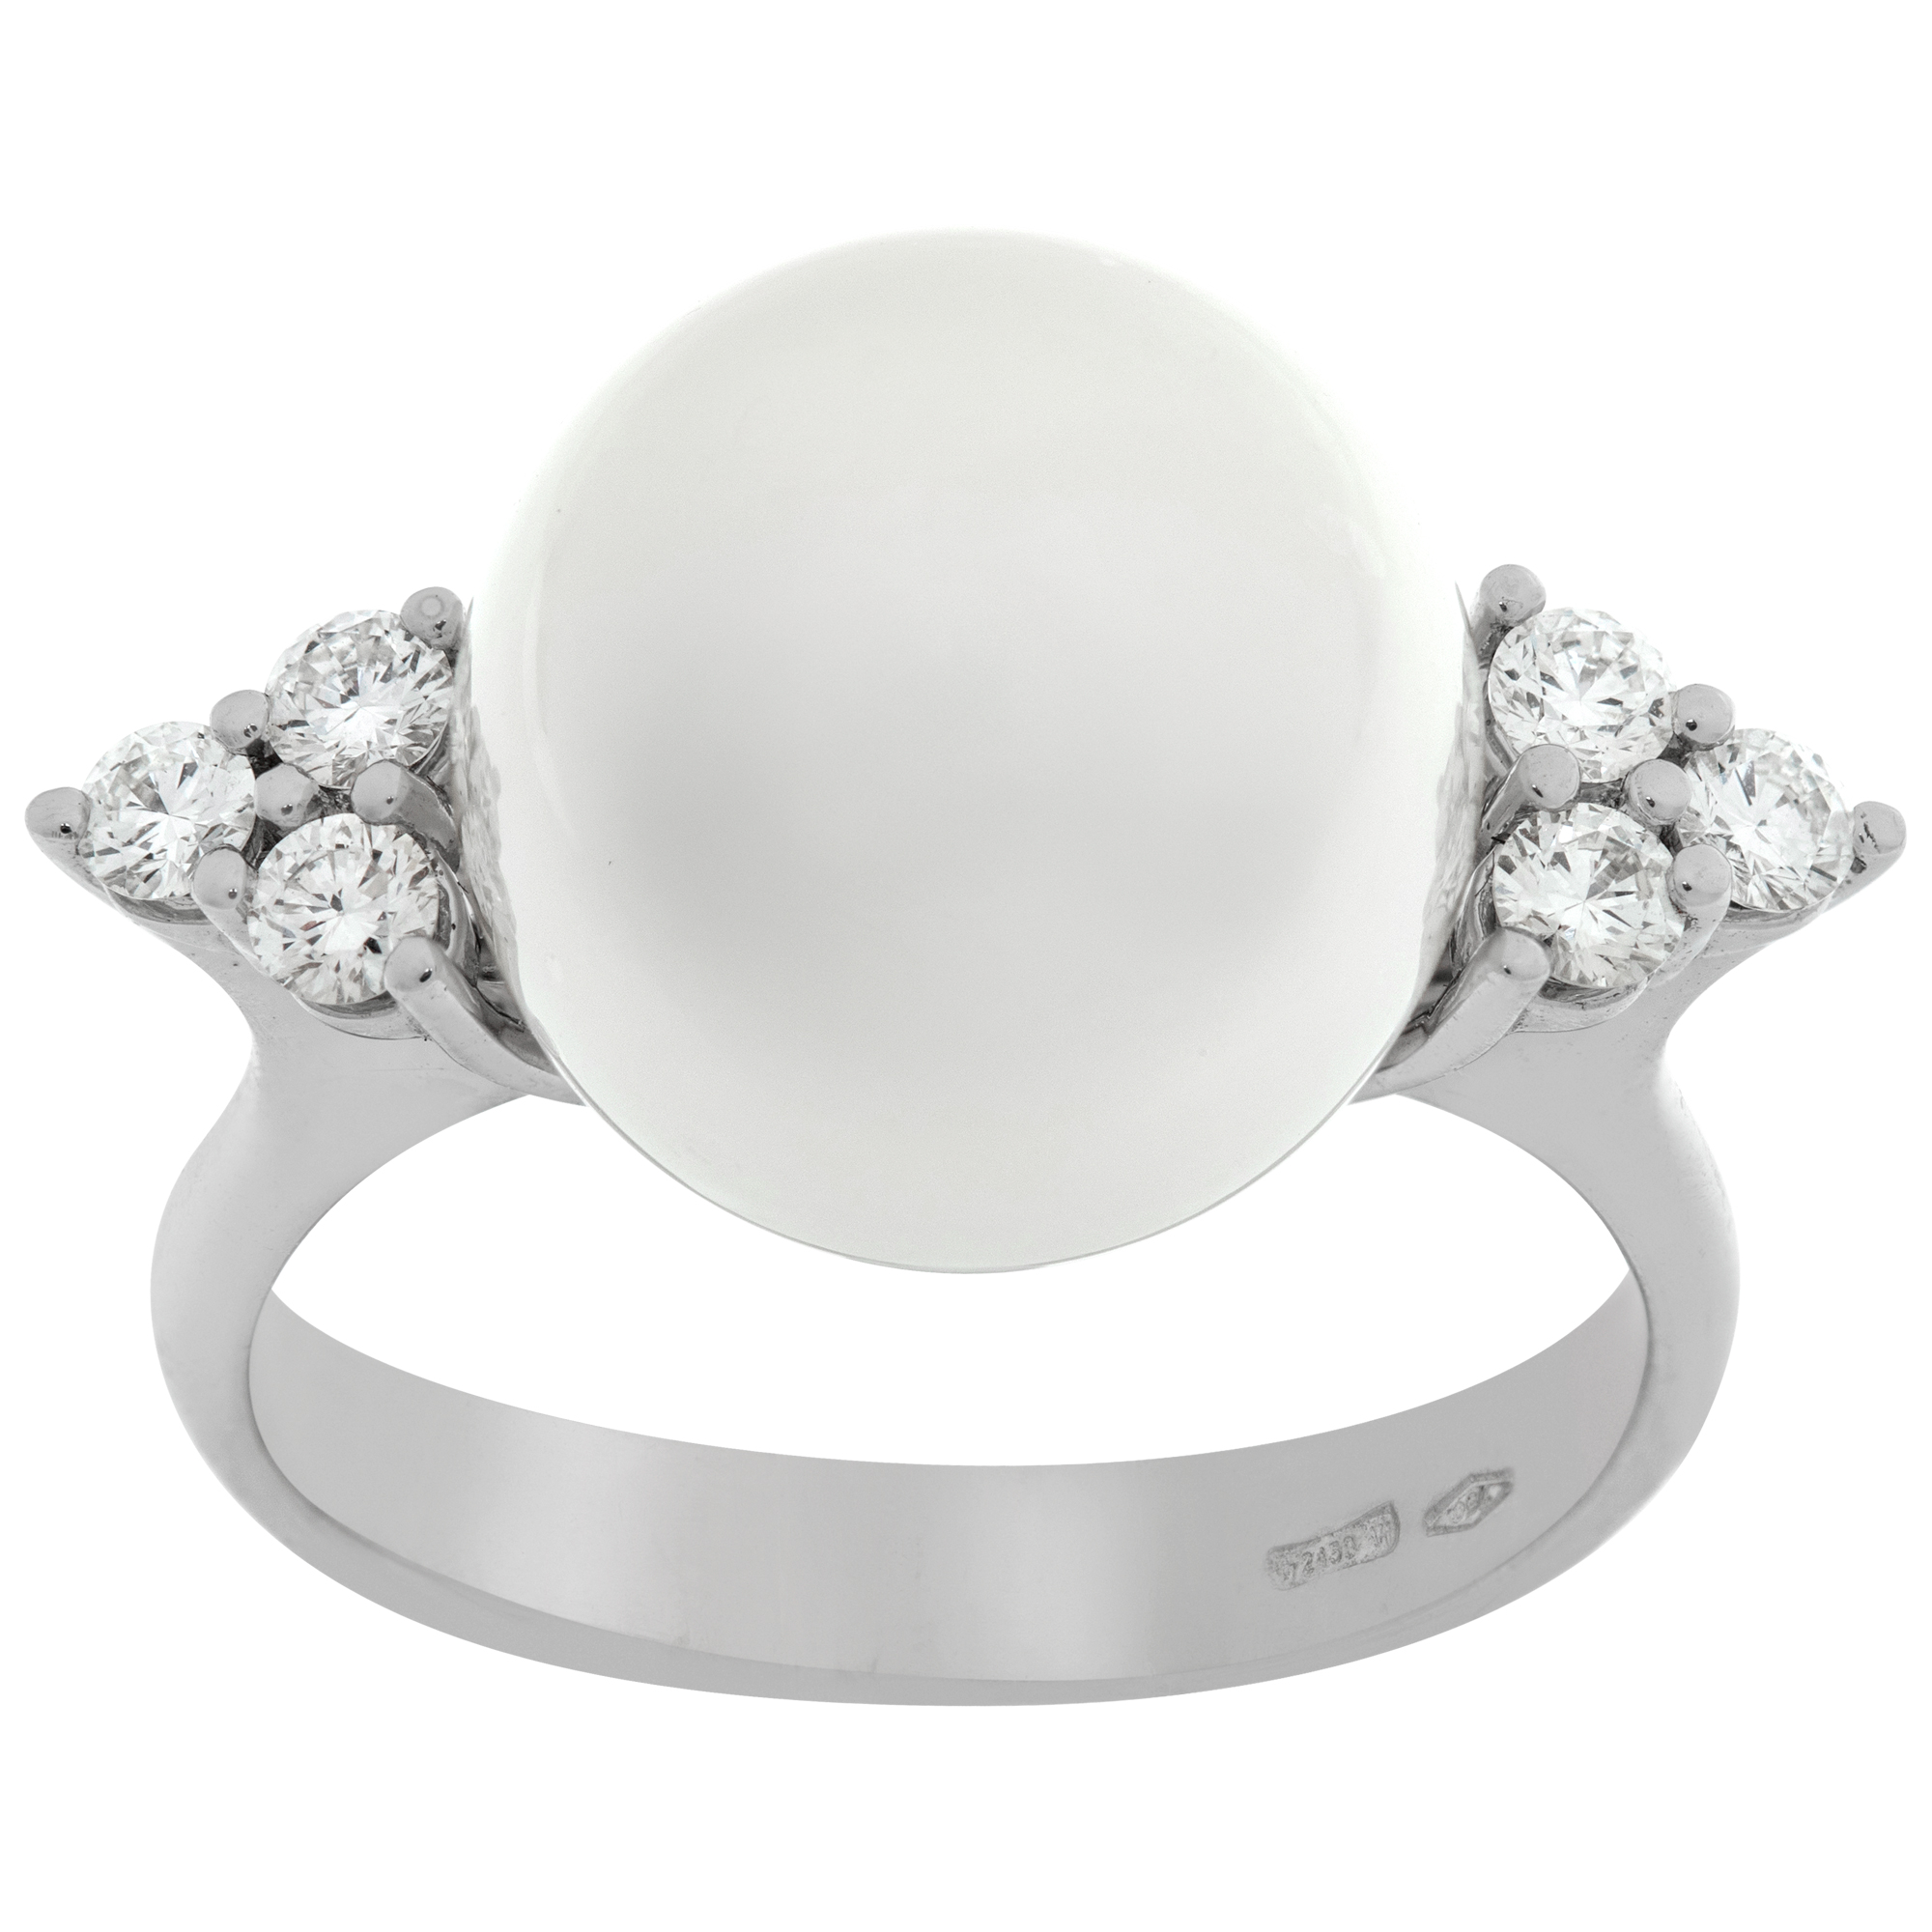 South sea pearl (11.5 x12mm) & diamonds ring, set in 18k white gold. Size 6.75